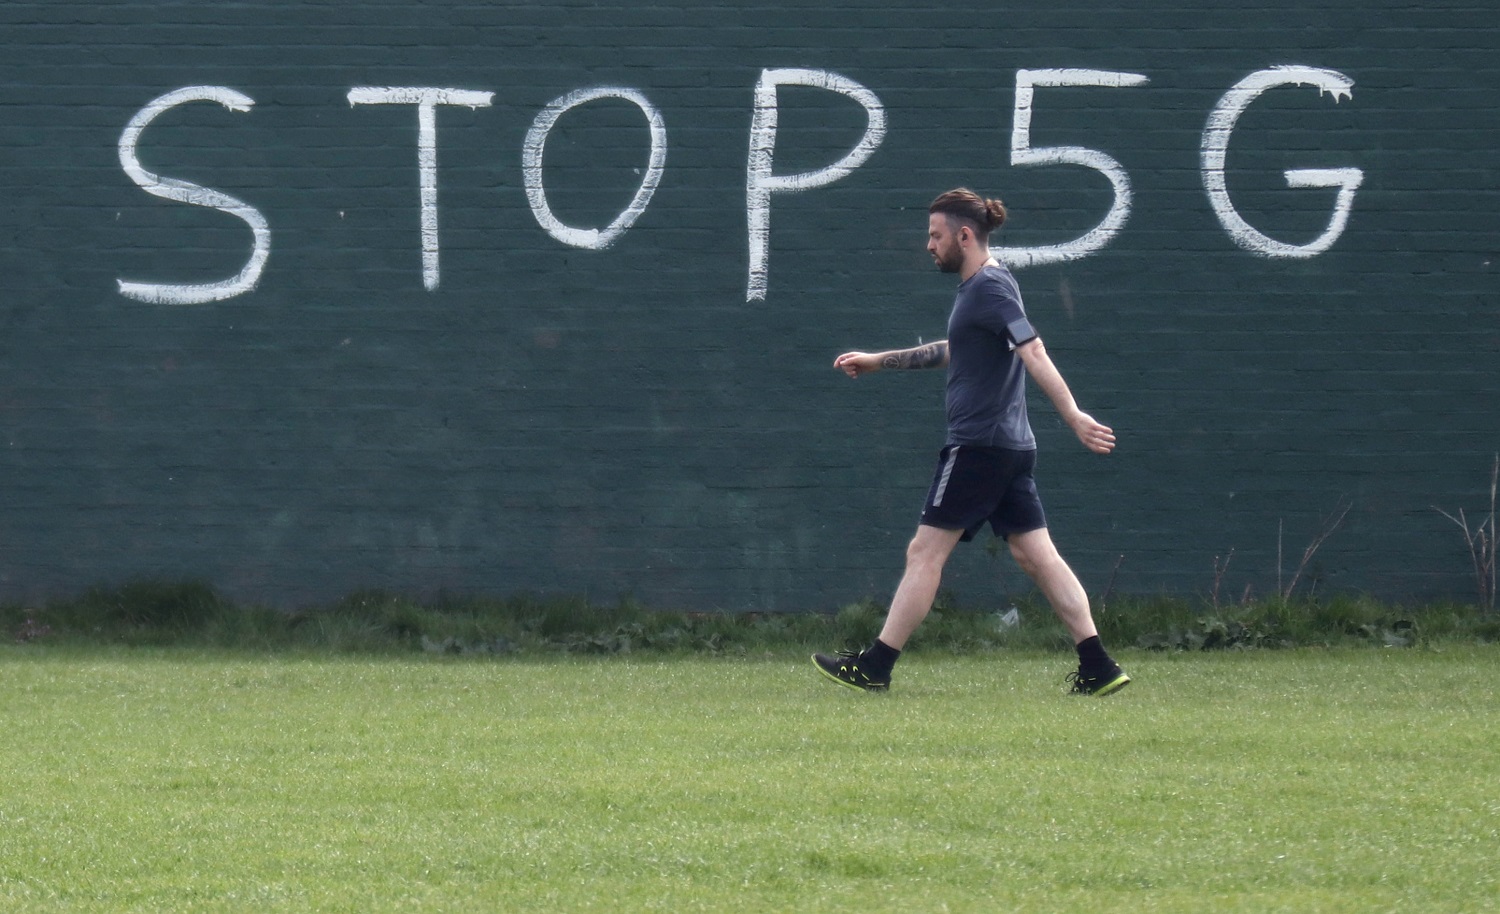 A man exercising during lockdown to combat an outbreak of coronavirus disease (COVID-19) walks past a graffiti that reads "STOP 5G" in London